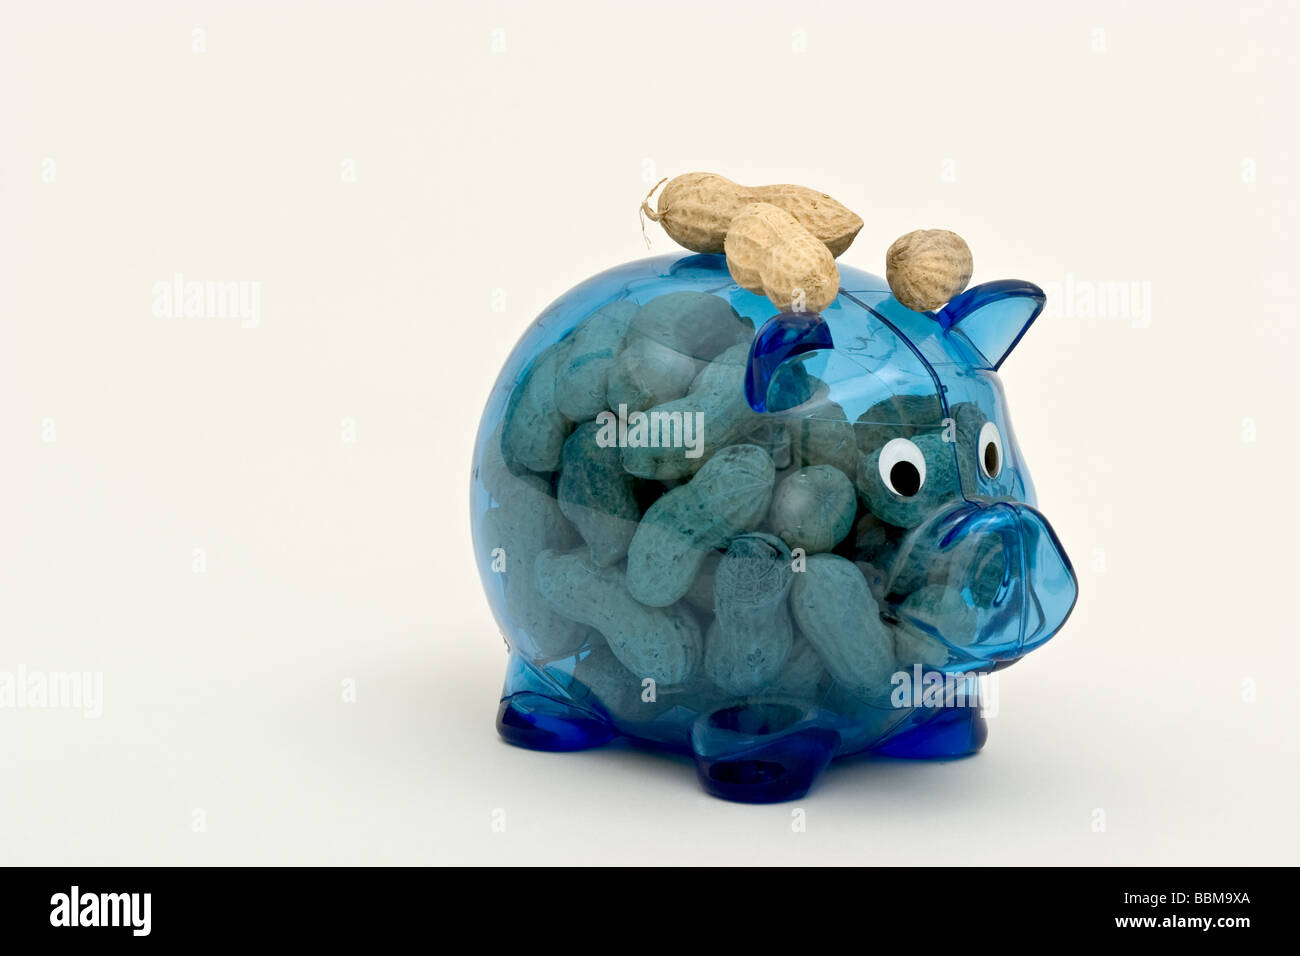 Clear blue piggy bank filled with unshelled peanuts with peanuts on top Stock Photo